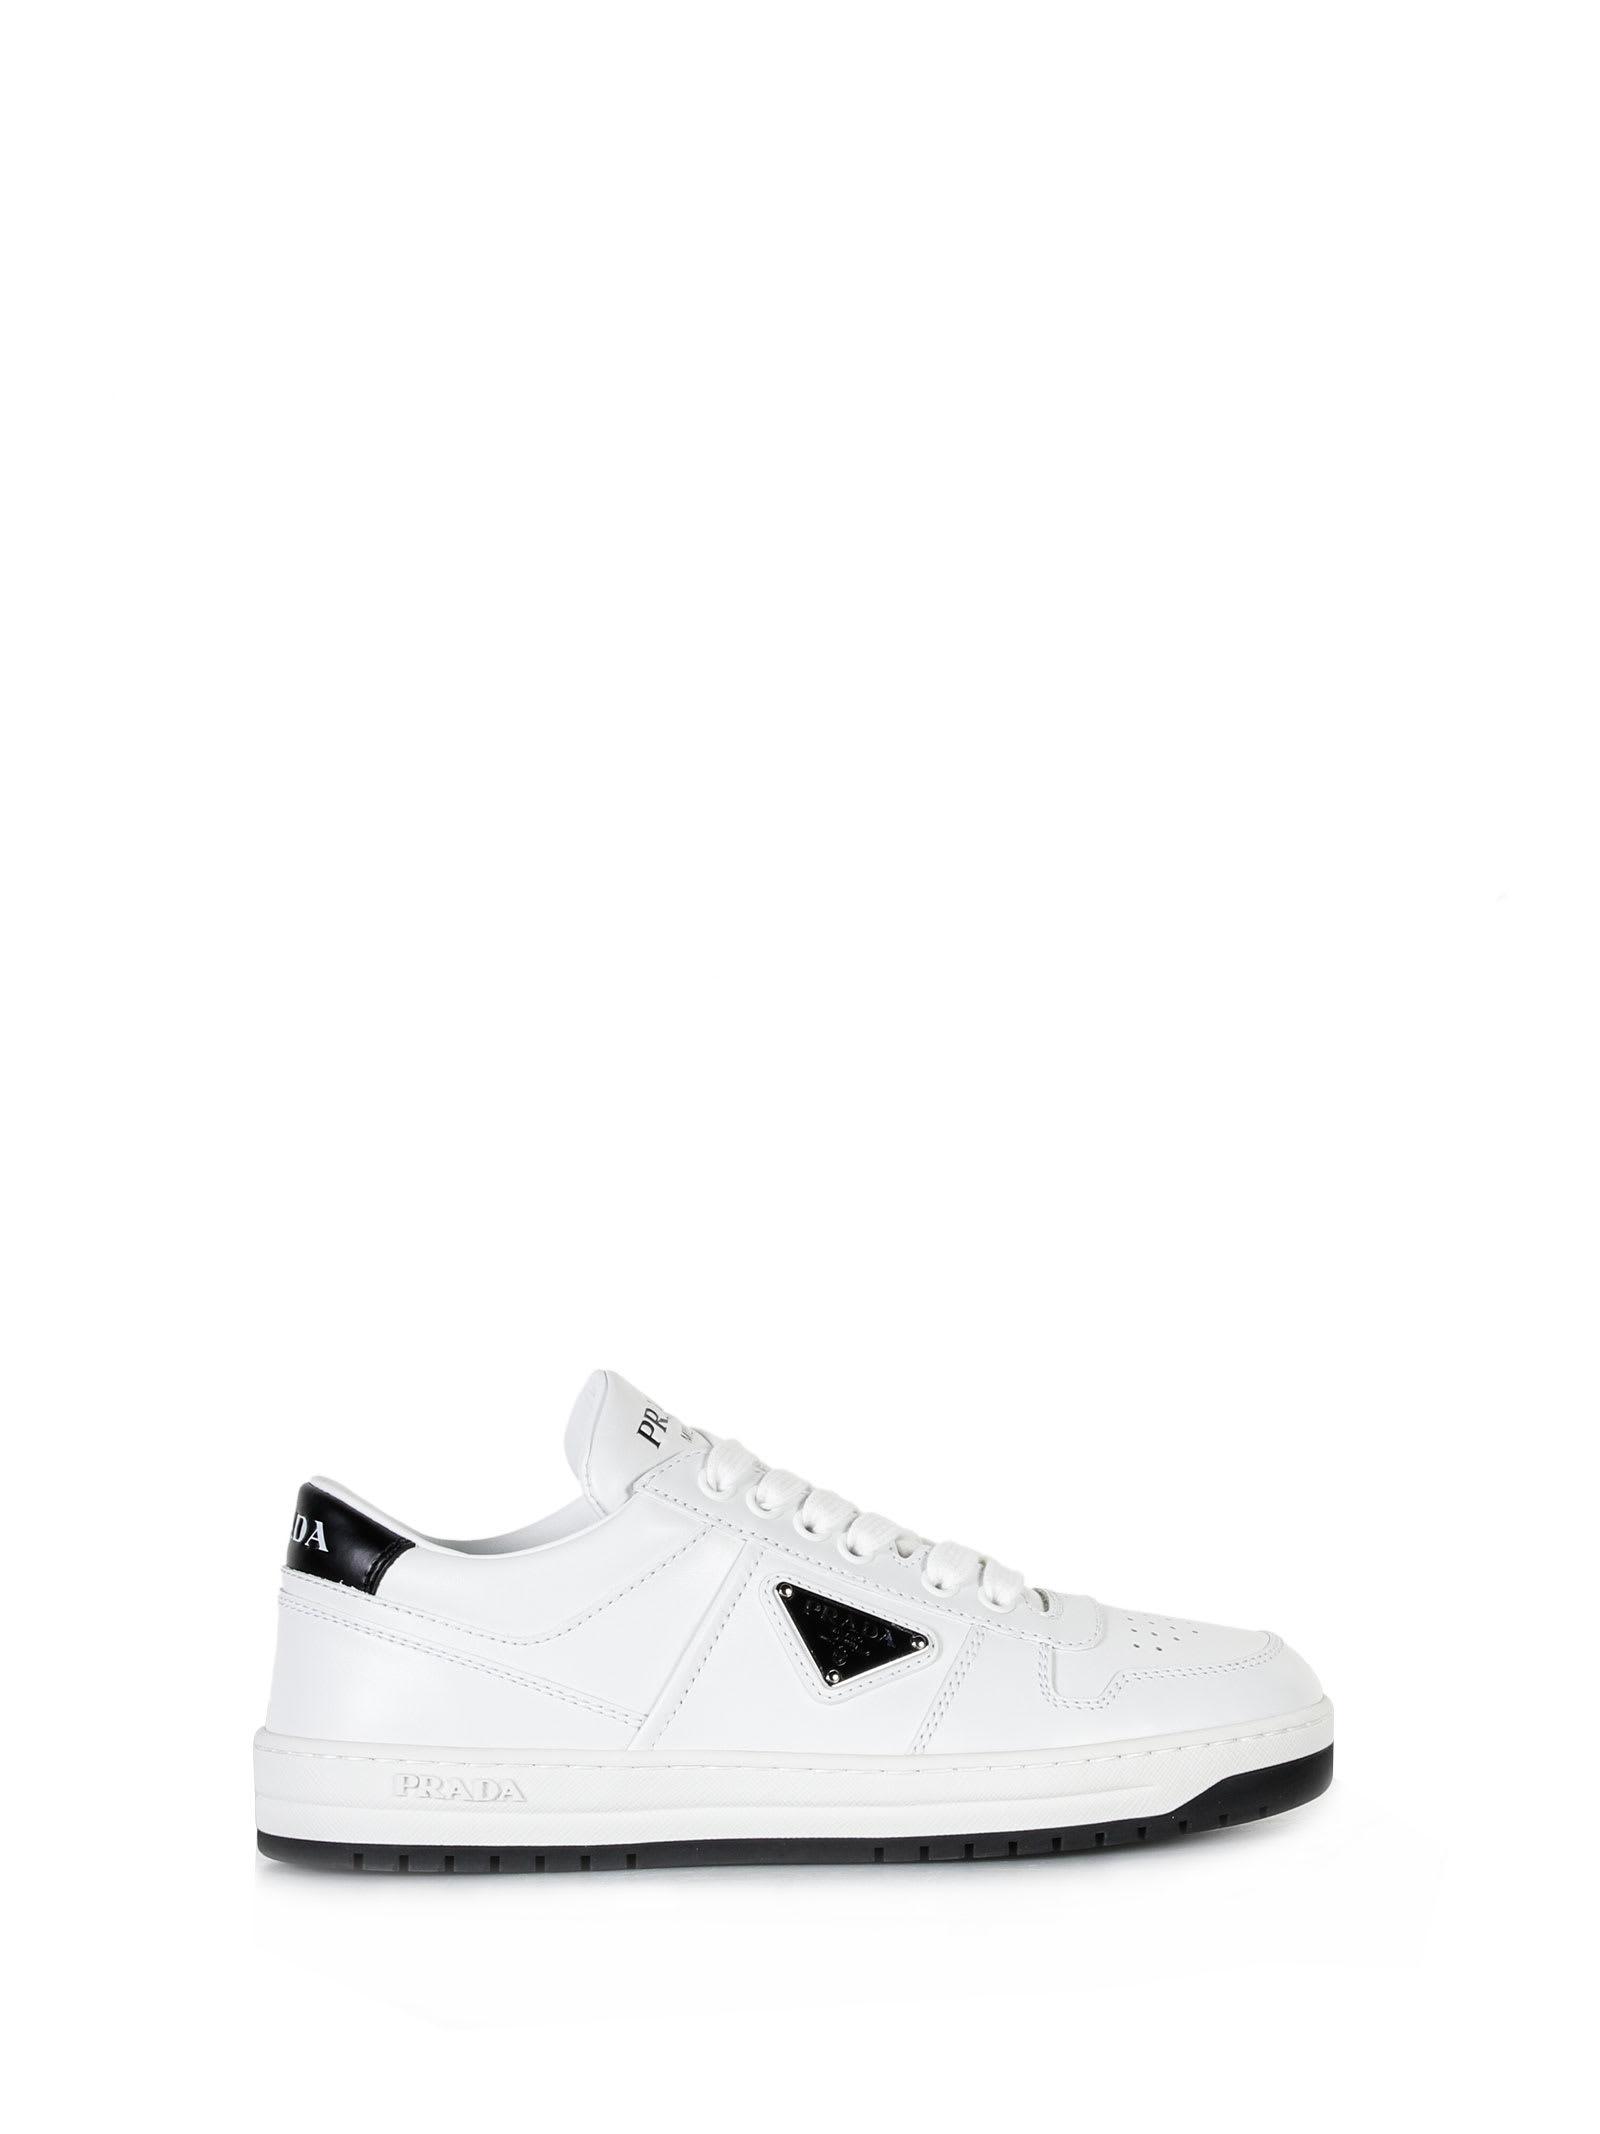 Prada Downtown Sneakers In Leather in White | Lyst